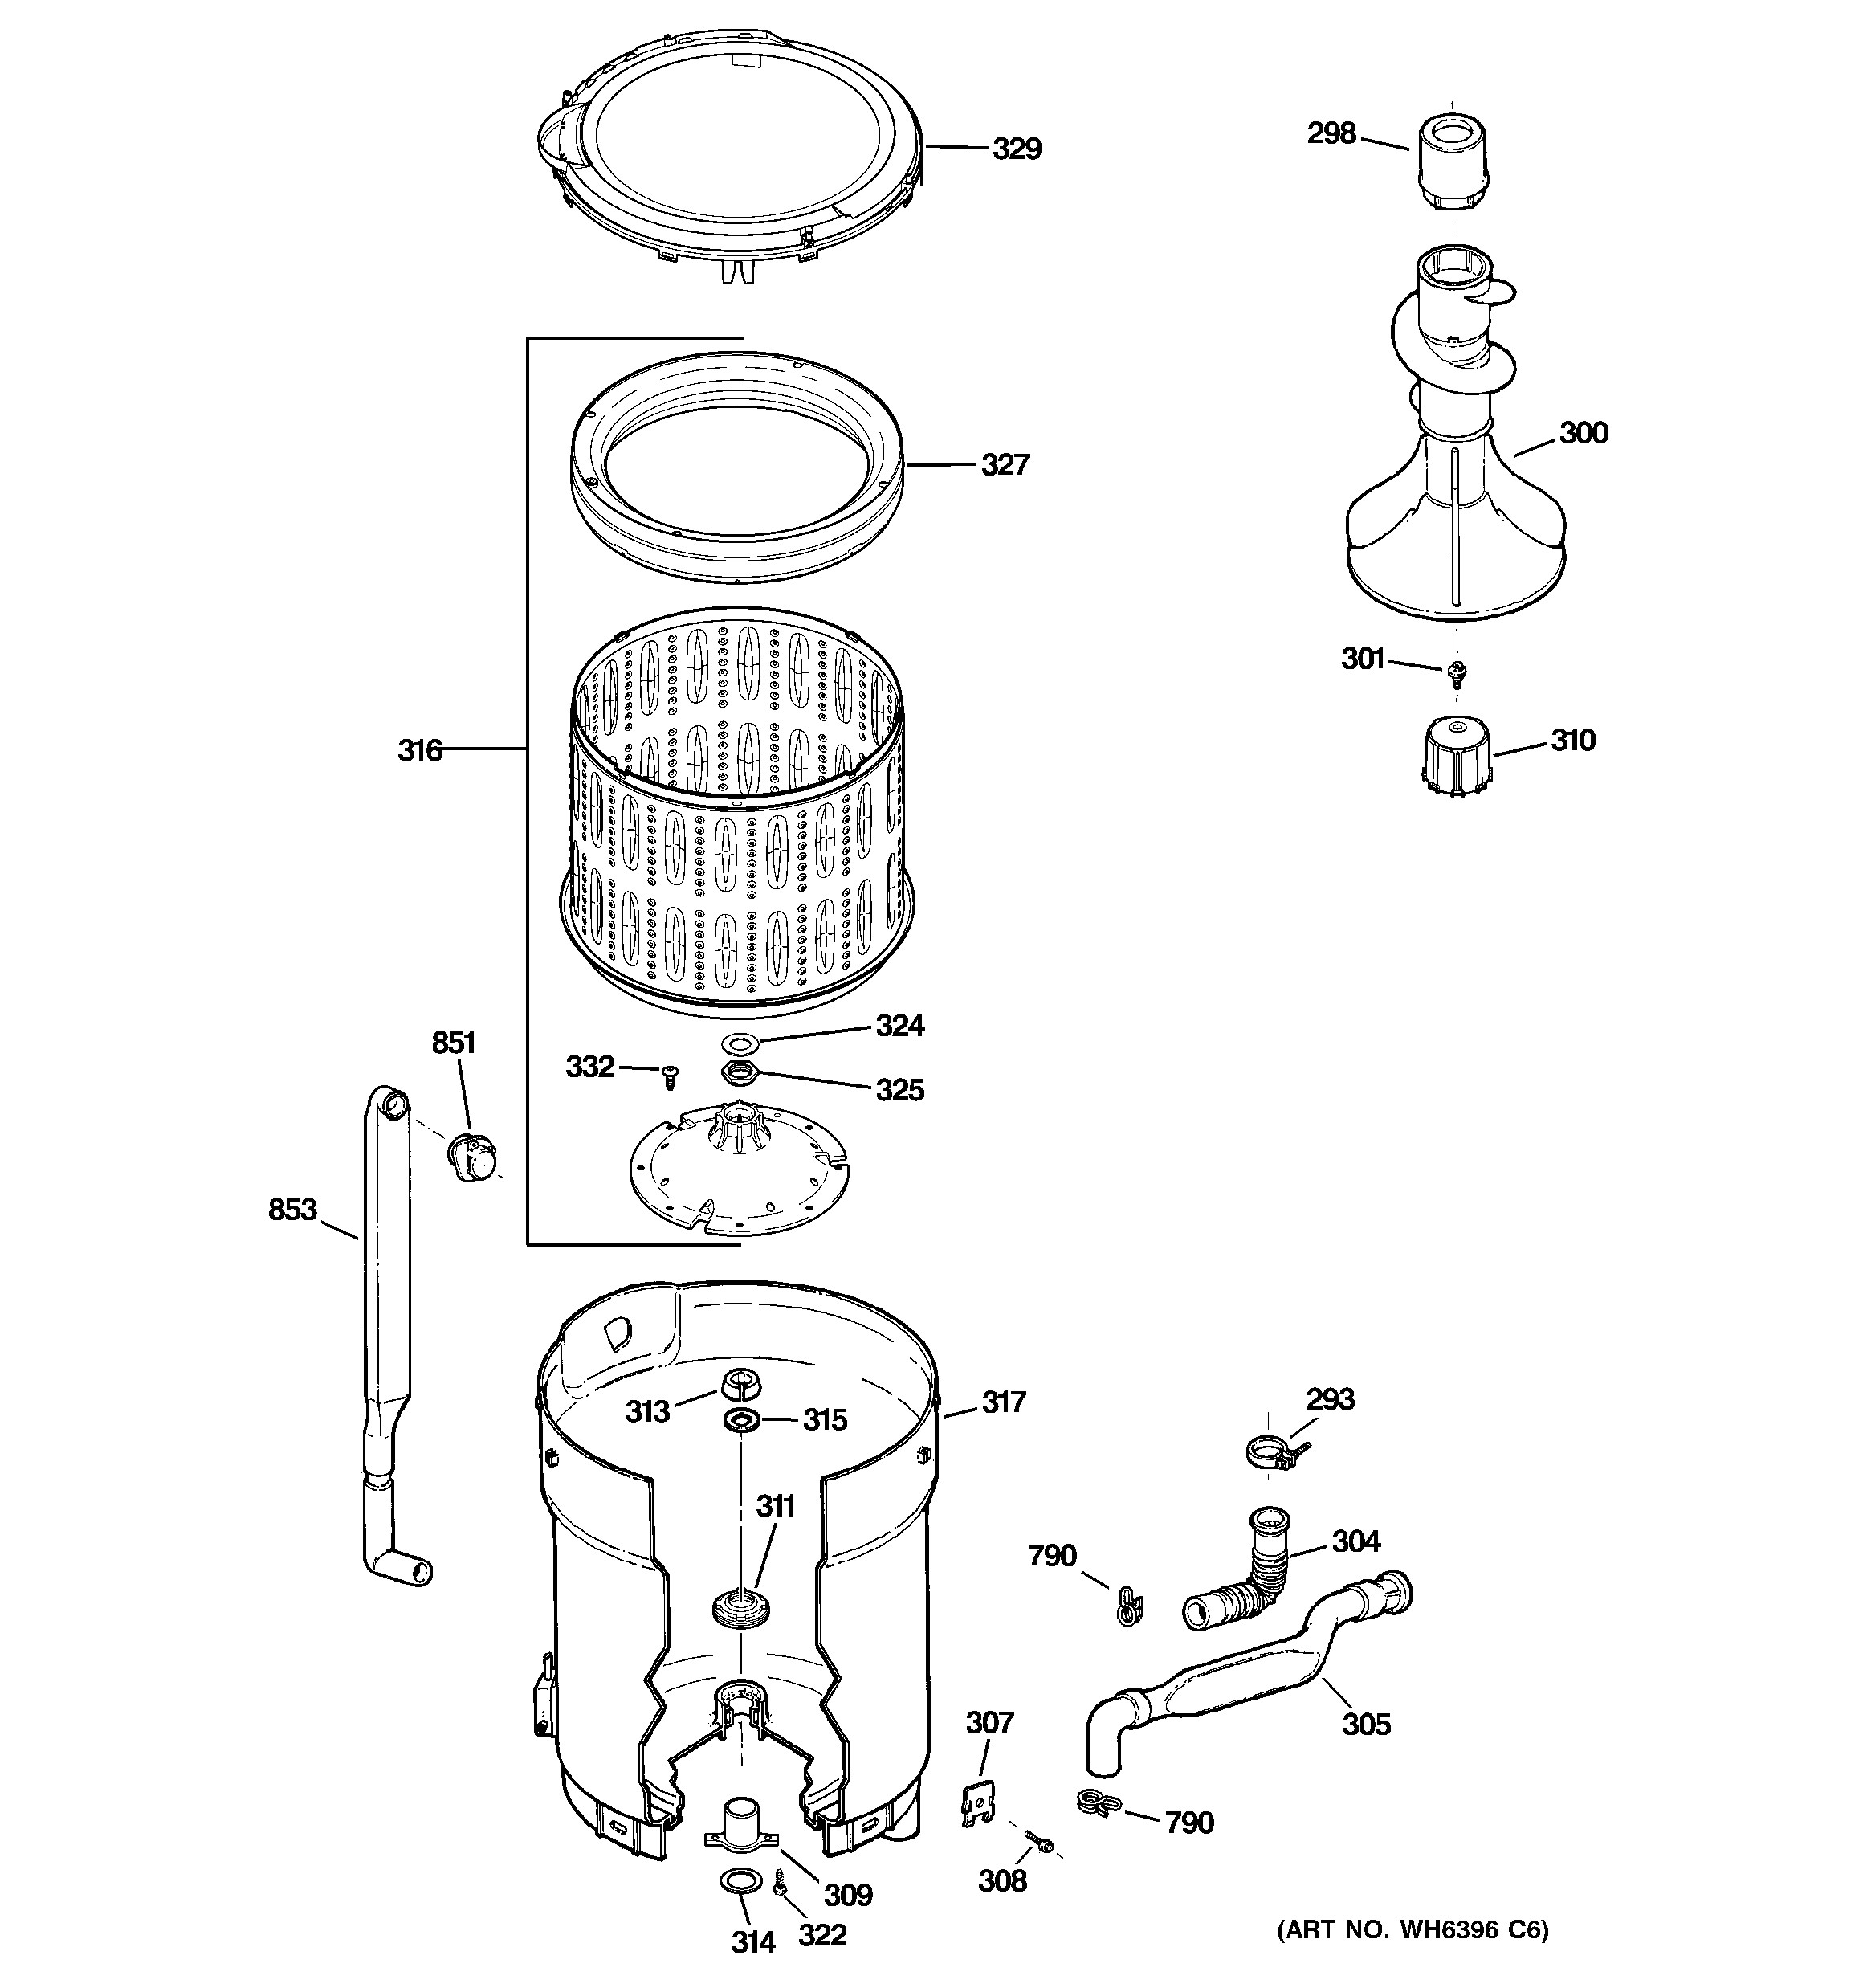 Suspension Components Diagram Ge Model Gtwn4250m1ws Residential Washers Genuine Parts Of Suspension Components Diagram